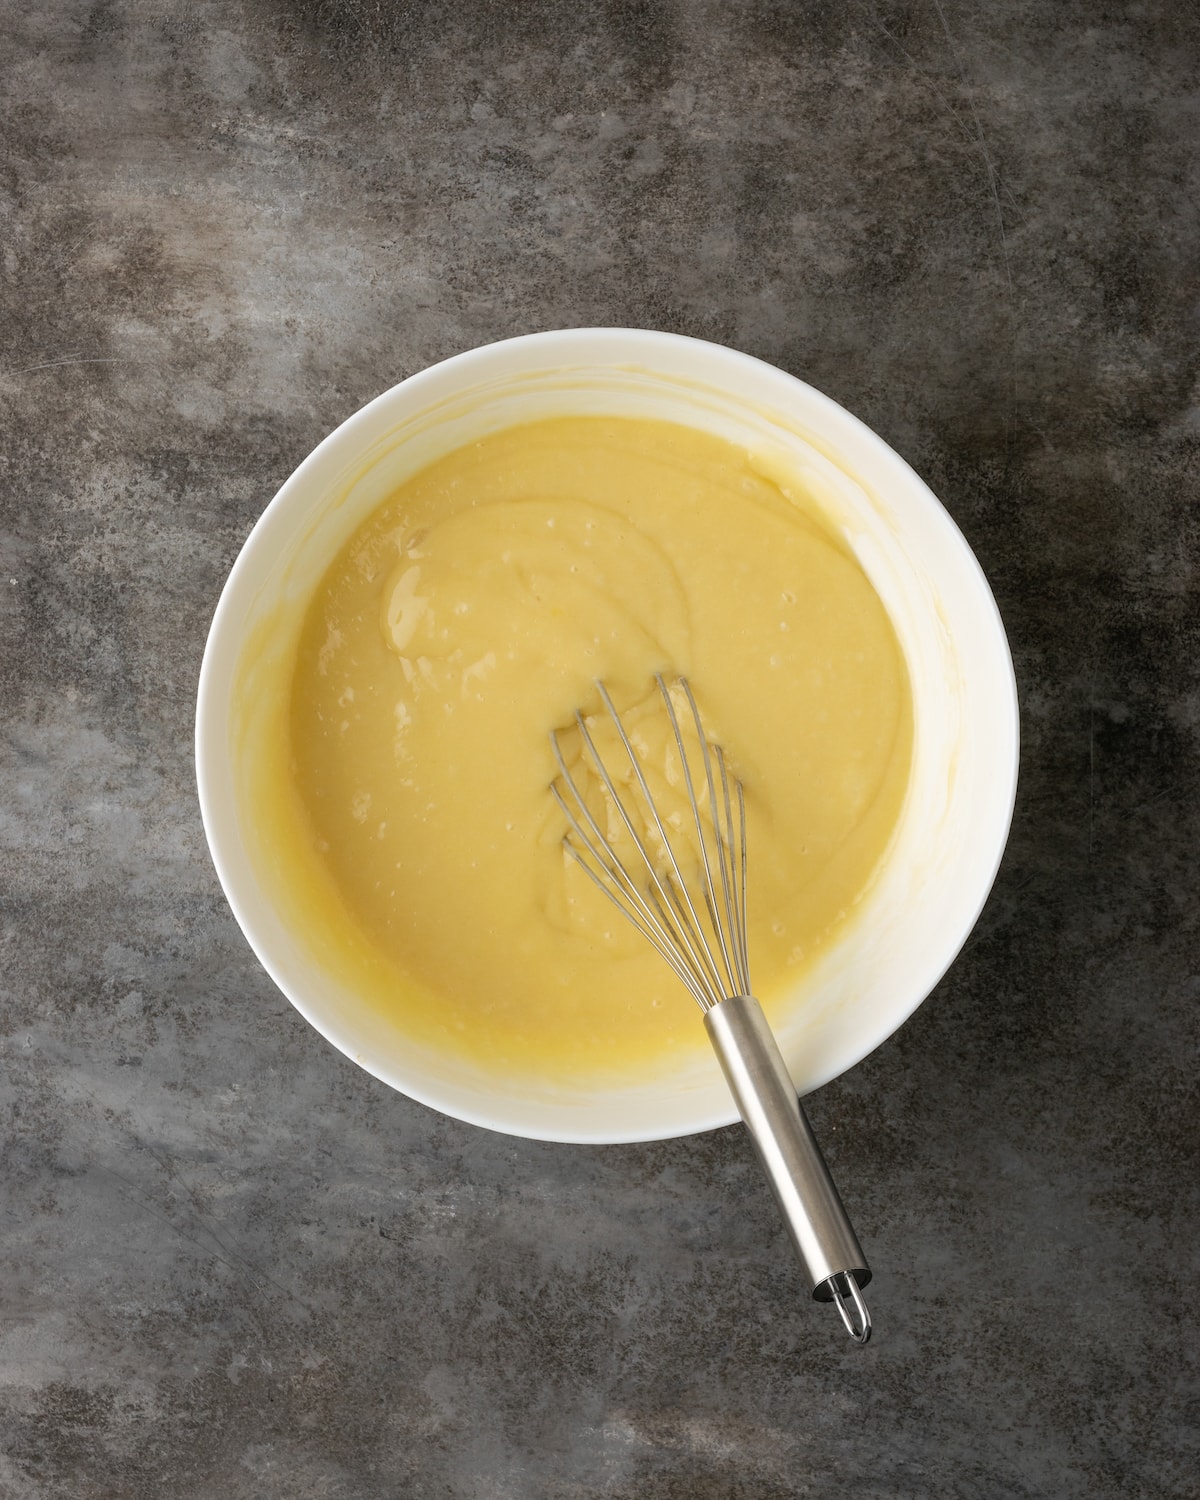 Buttermilk cake batter in a mixing bowl with a whisk.